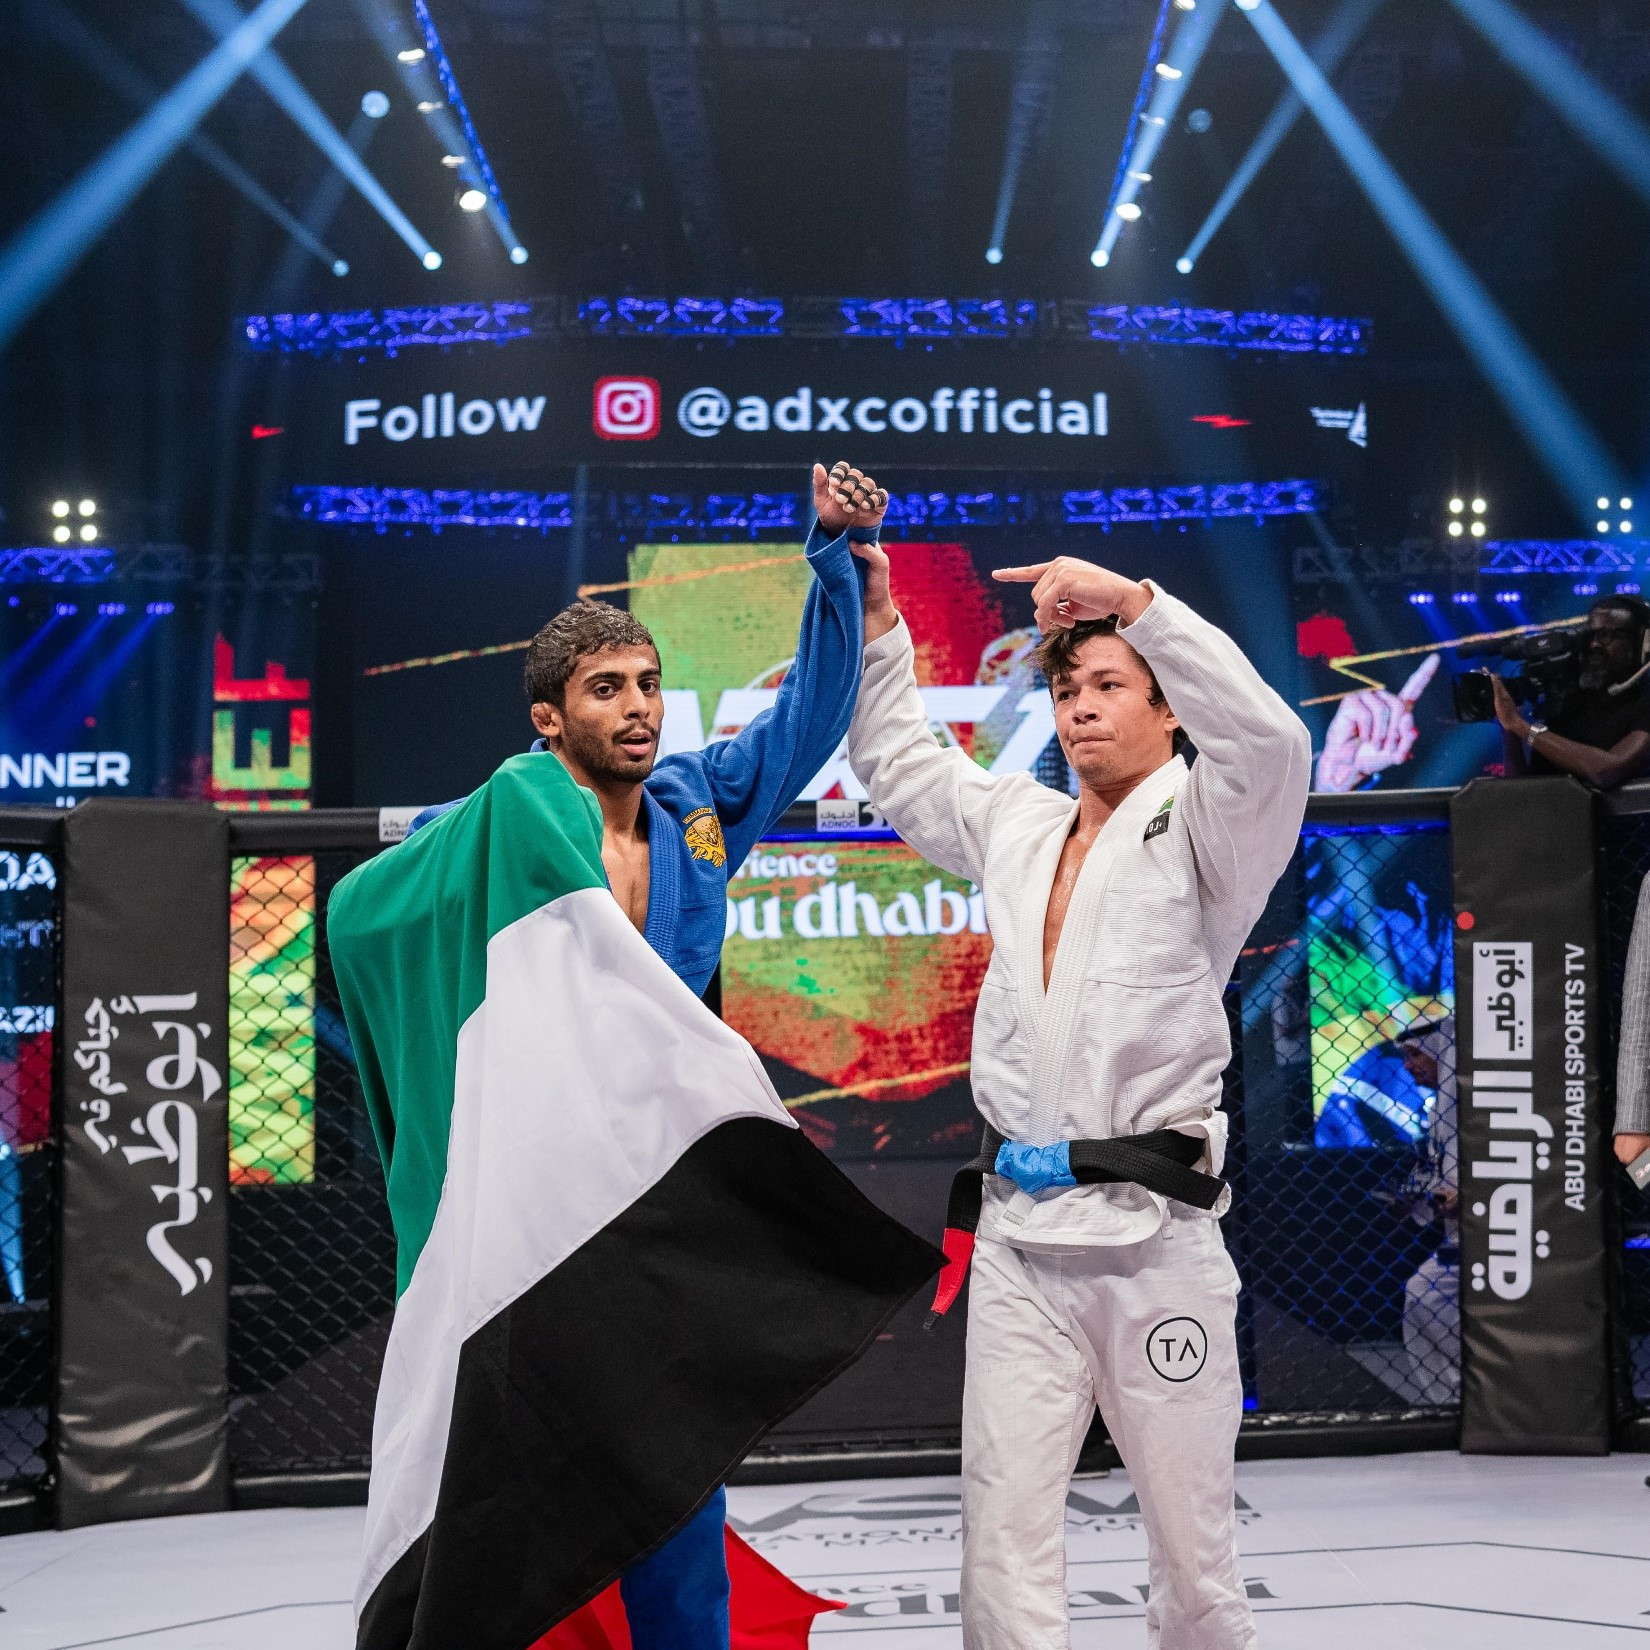 The first edition of the Abu Dhabi Extreme Championship has been described as "groundbreaking", and with the potential to reshape the global landscape of jiu-jitsu ©Action UAE